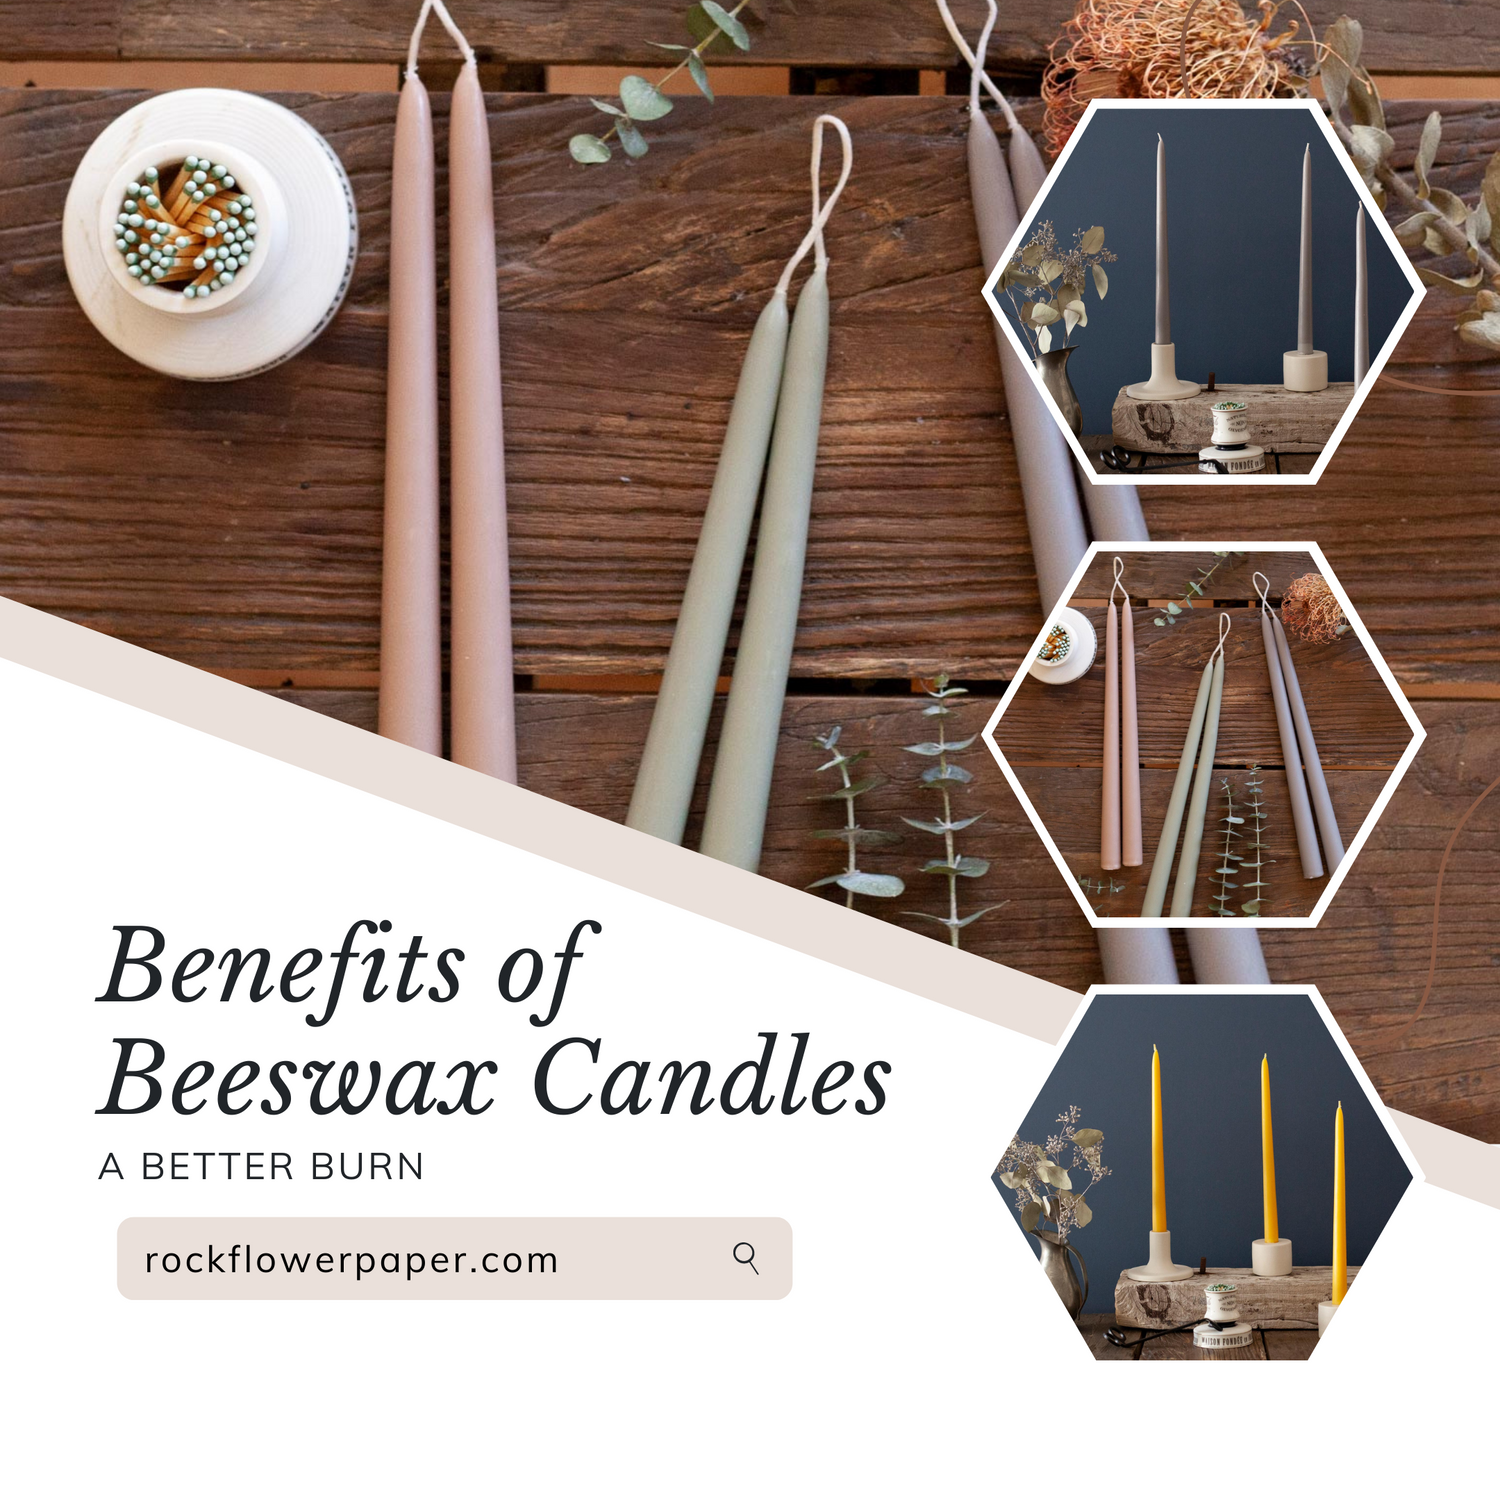 Benefits of Beeswax Candles: A Better Burn